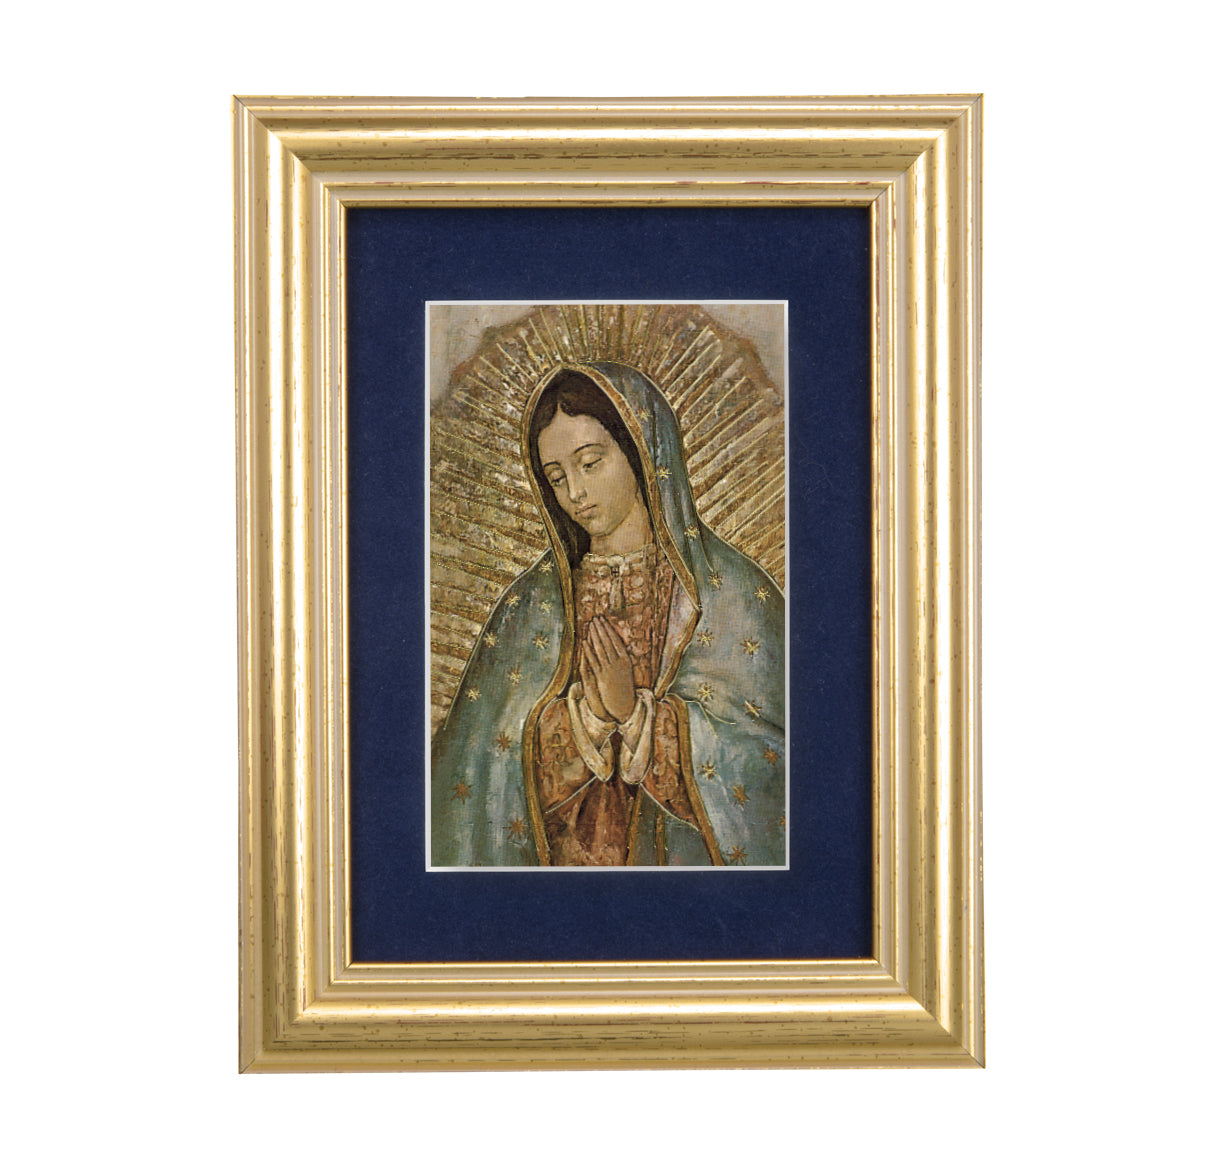 Our Lady of Guadalupe Gold Framed Art with Blue Velvet Matting